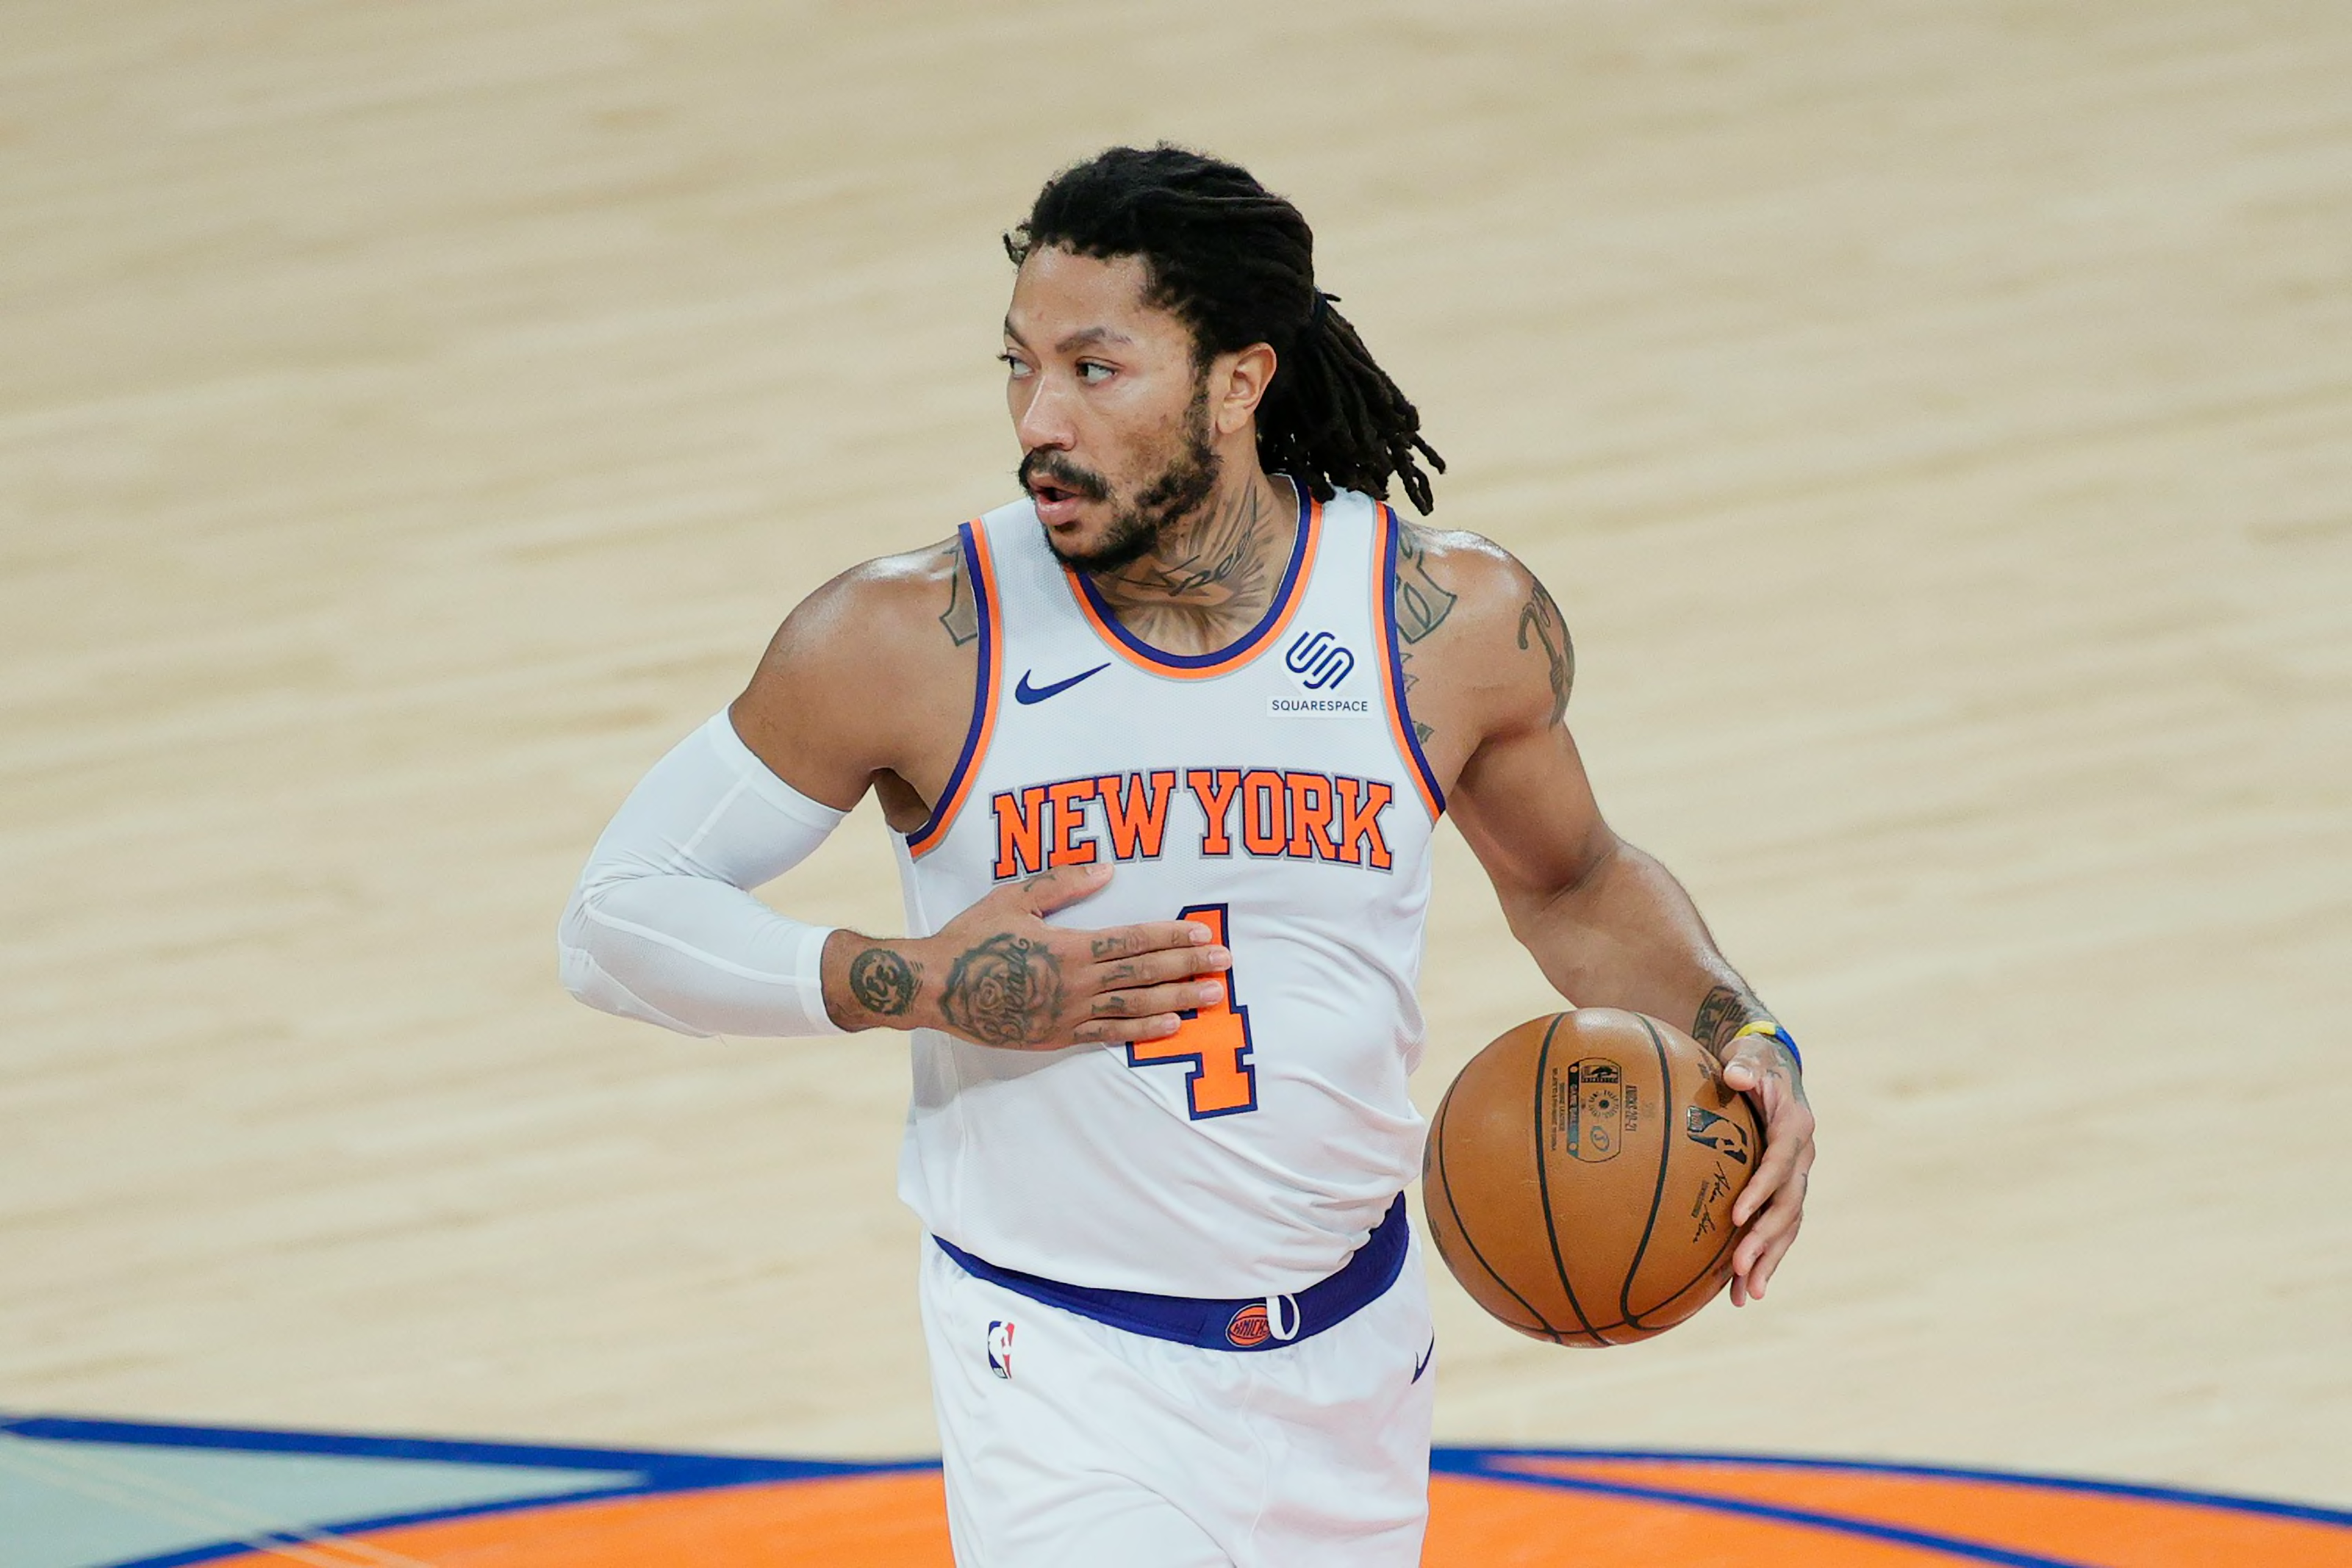 What 2022 NBA Awards Can New York Knicks Players Win? - Page 3